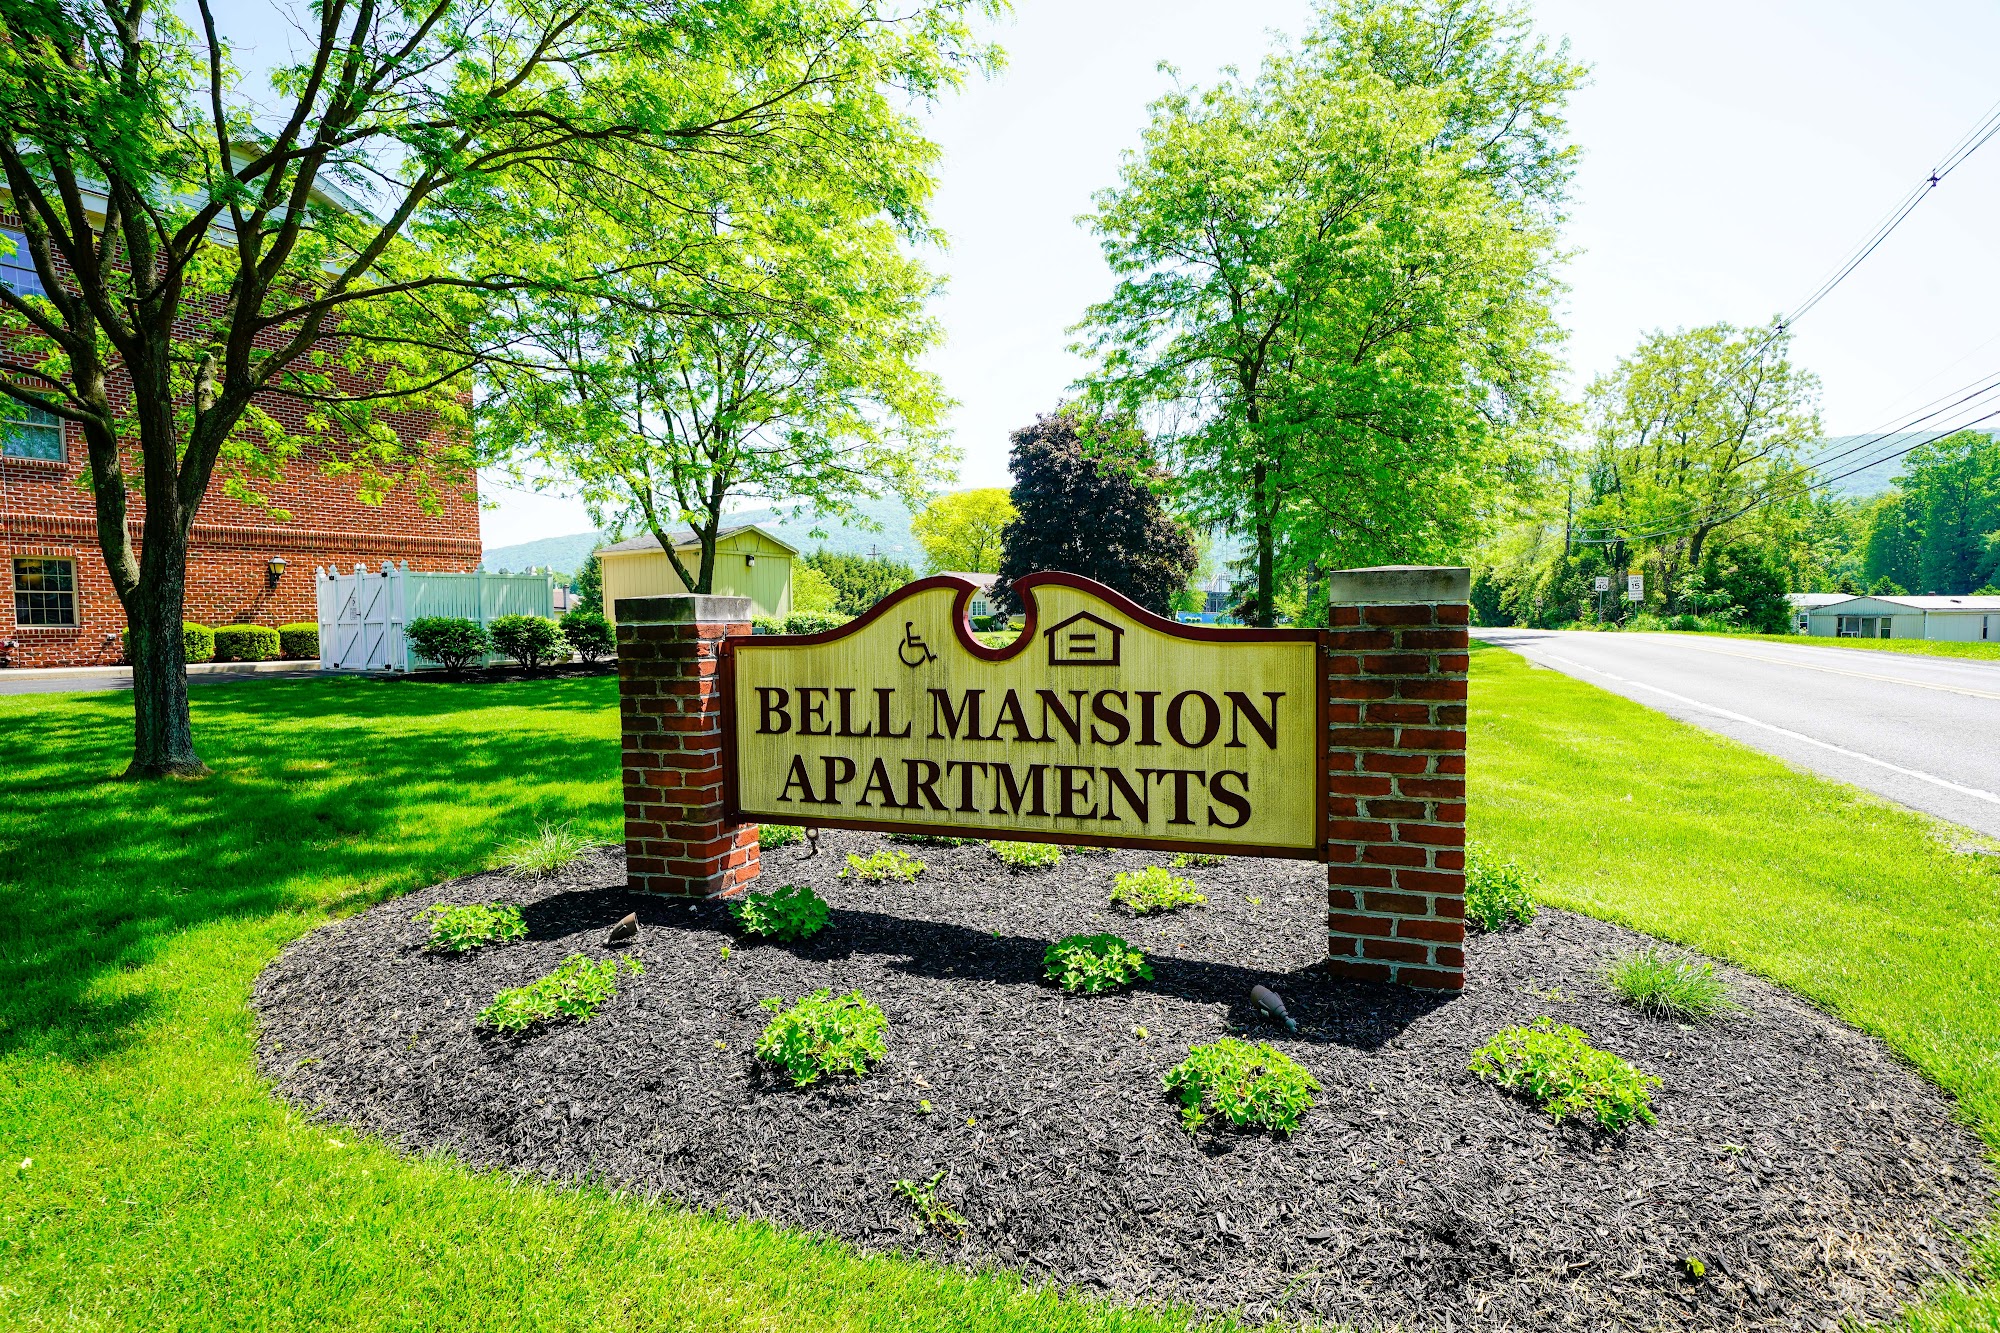 Bell Mansion Apartments